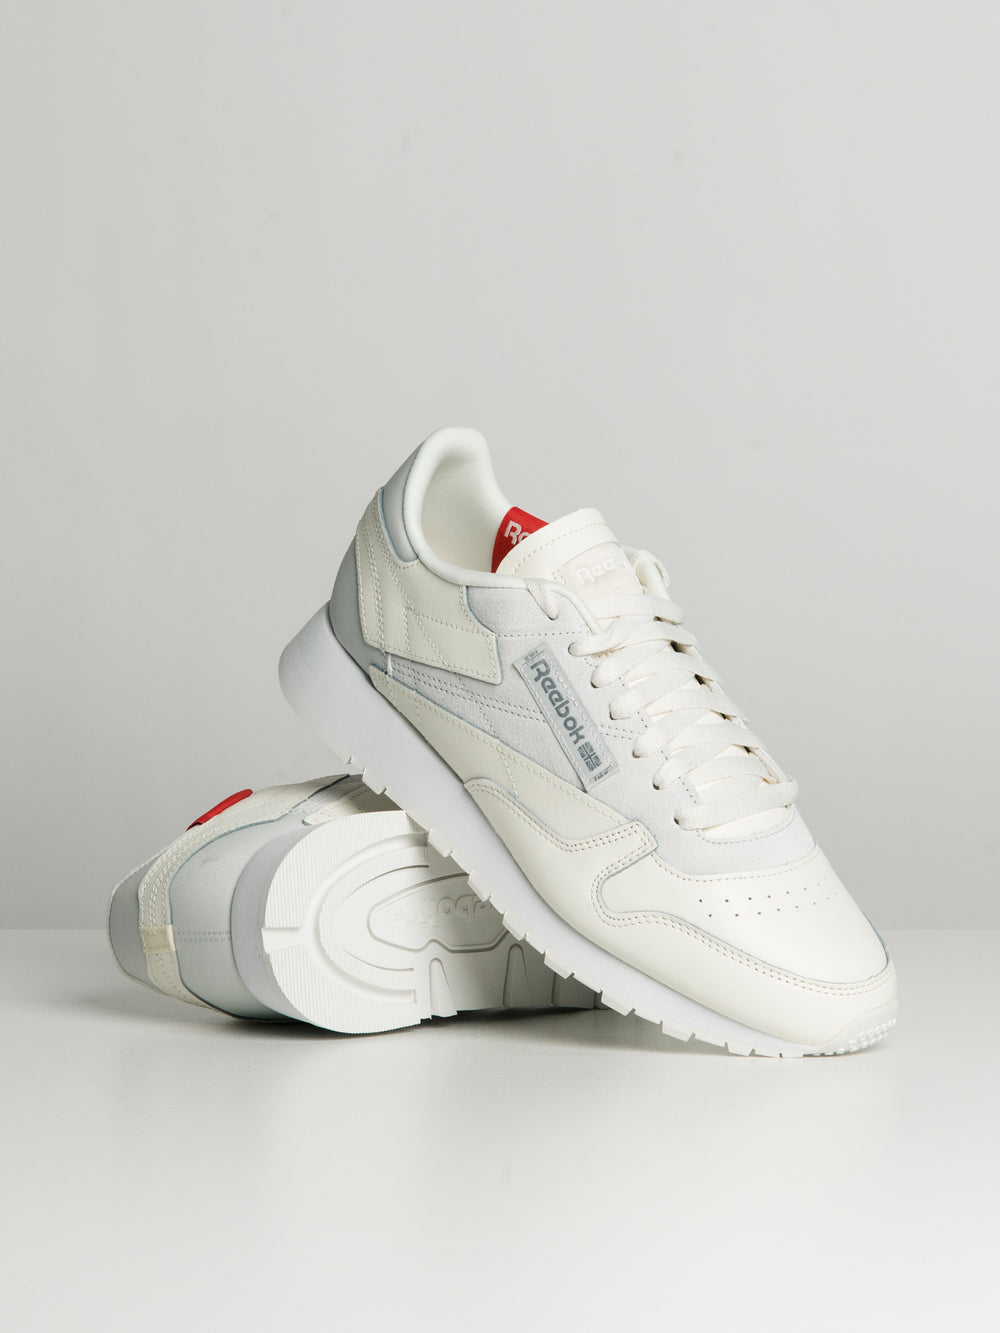 MENS REEBOK CLASSIC LEATHER - CLEARANCE